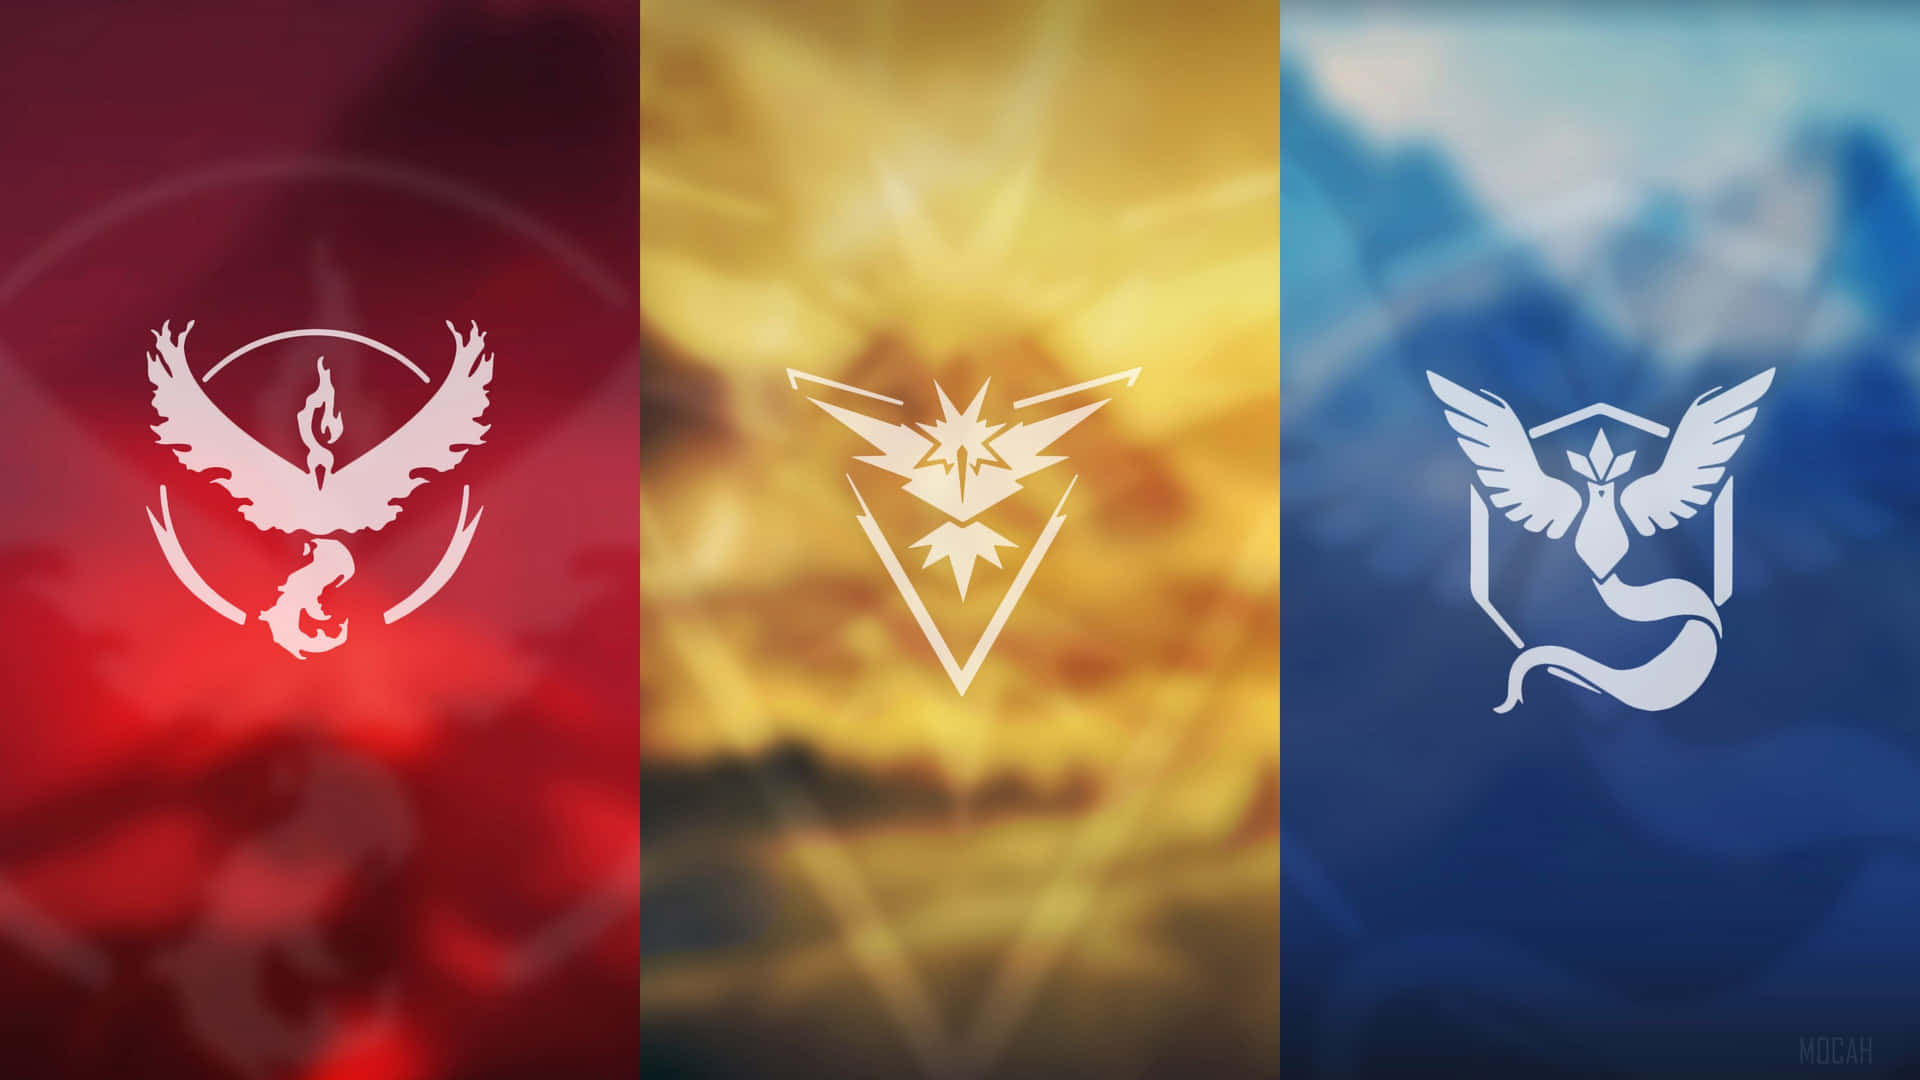 Pokemon Logos In Different Colors Background